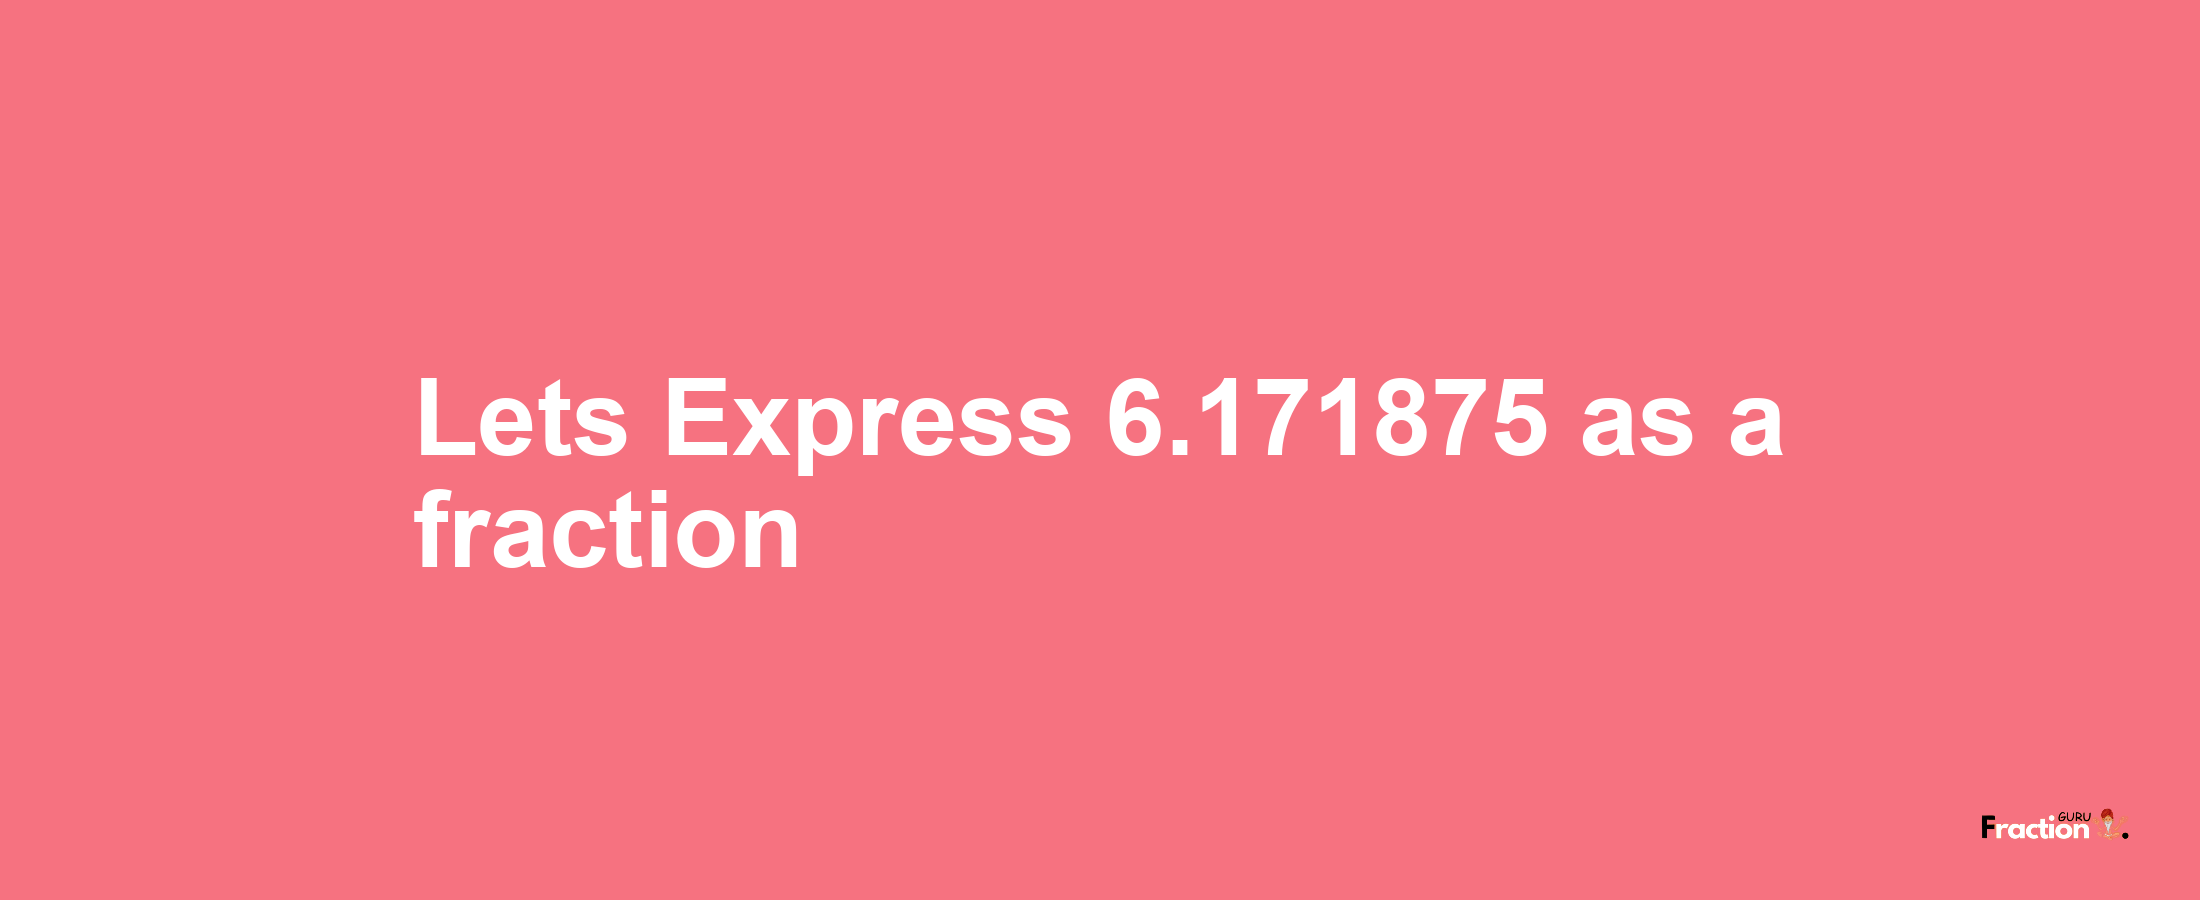 Lets Express 6.171875 as afraction